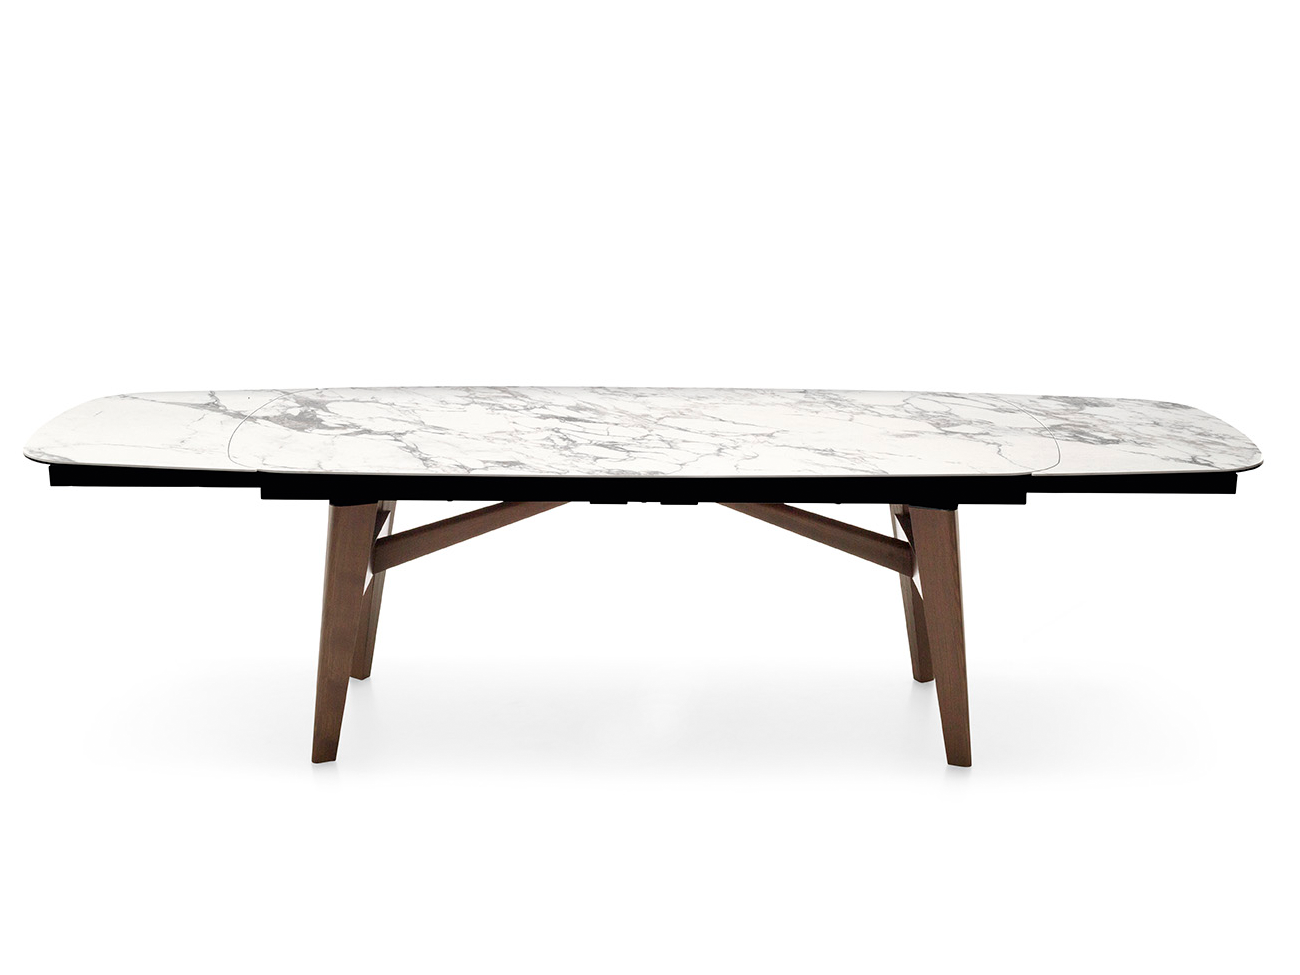 Abrey Dining Table